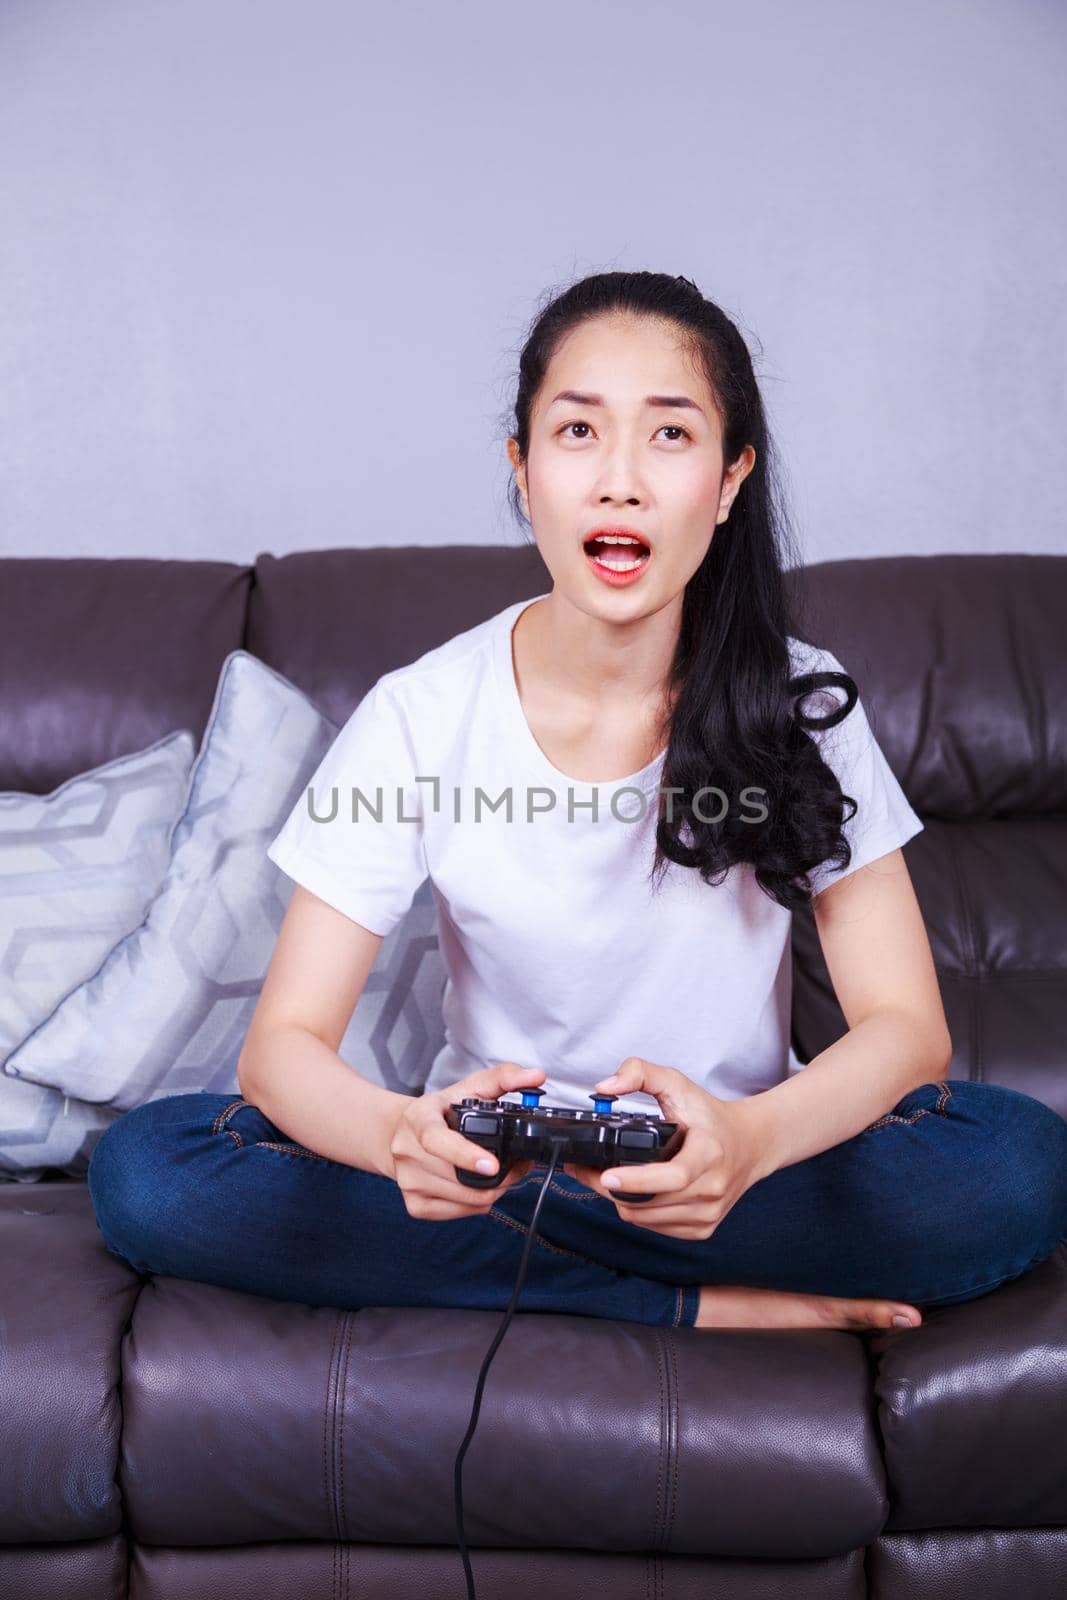 woman using joystick controller playing video game on sofa in living room at home